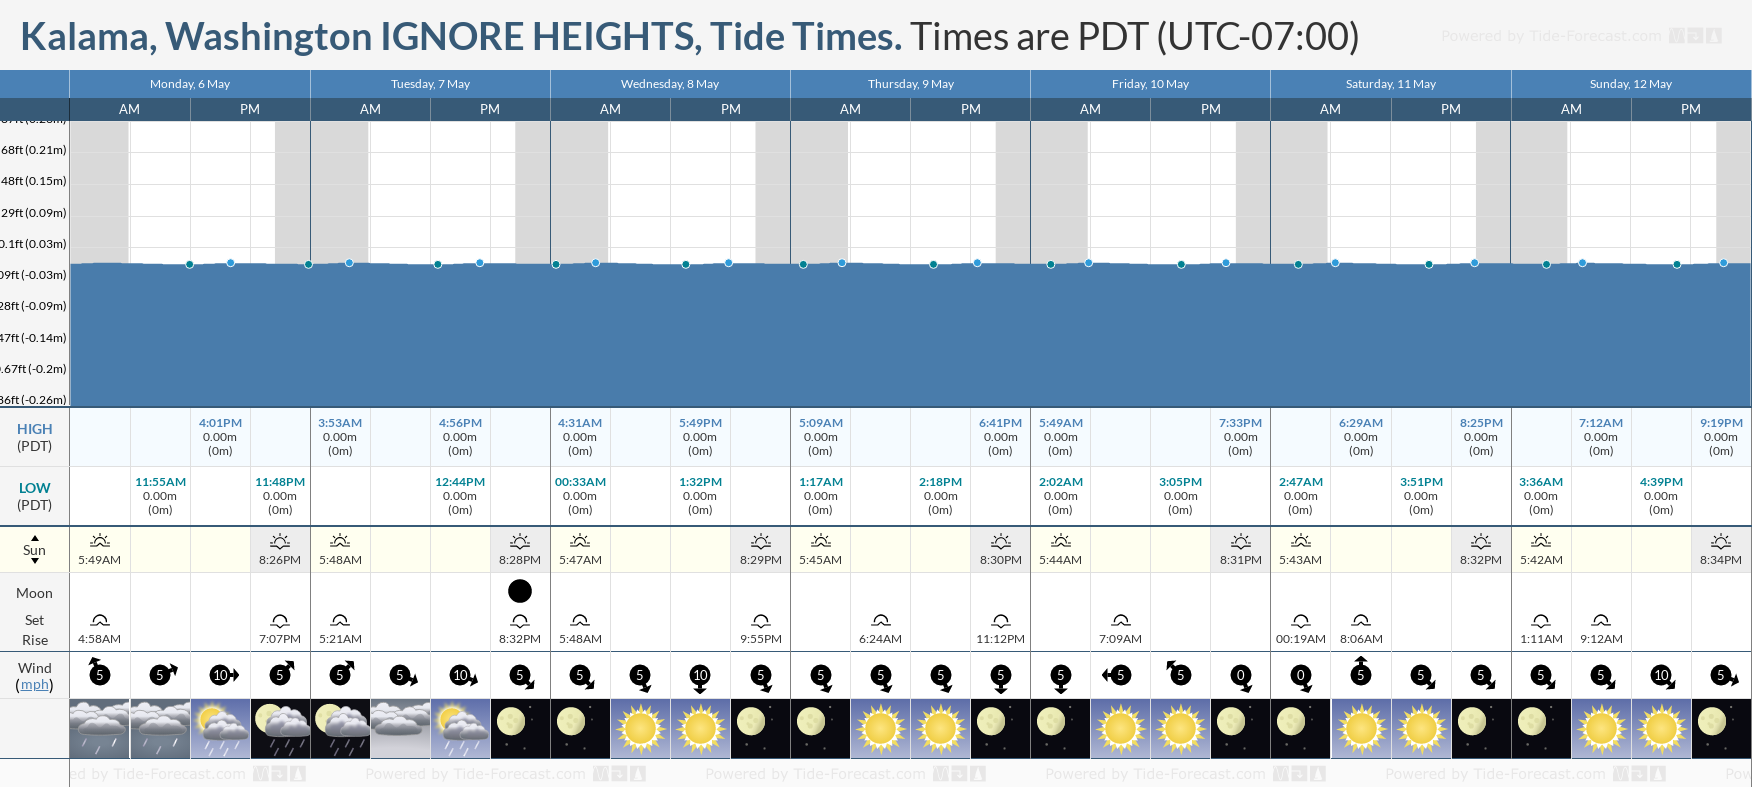 Kalama, Washington IGNORE HEIGHTS Tide Chart including high and low tide times for the next 7 days